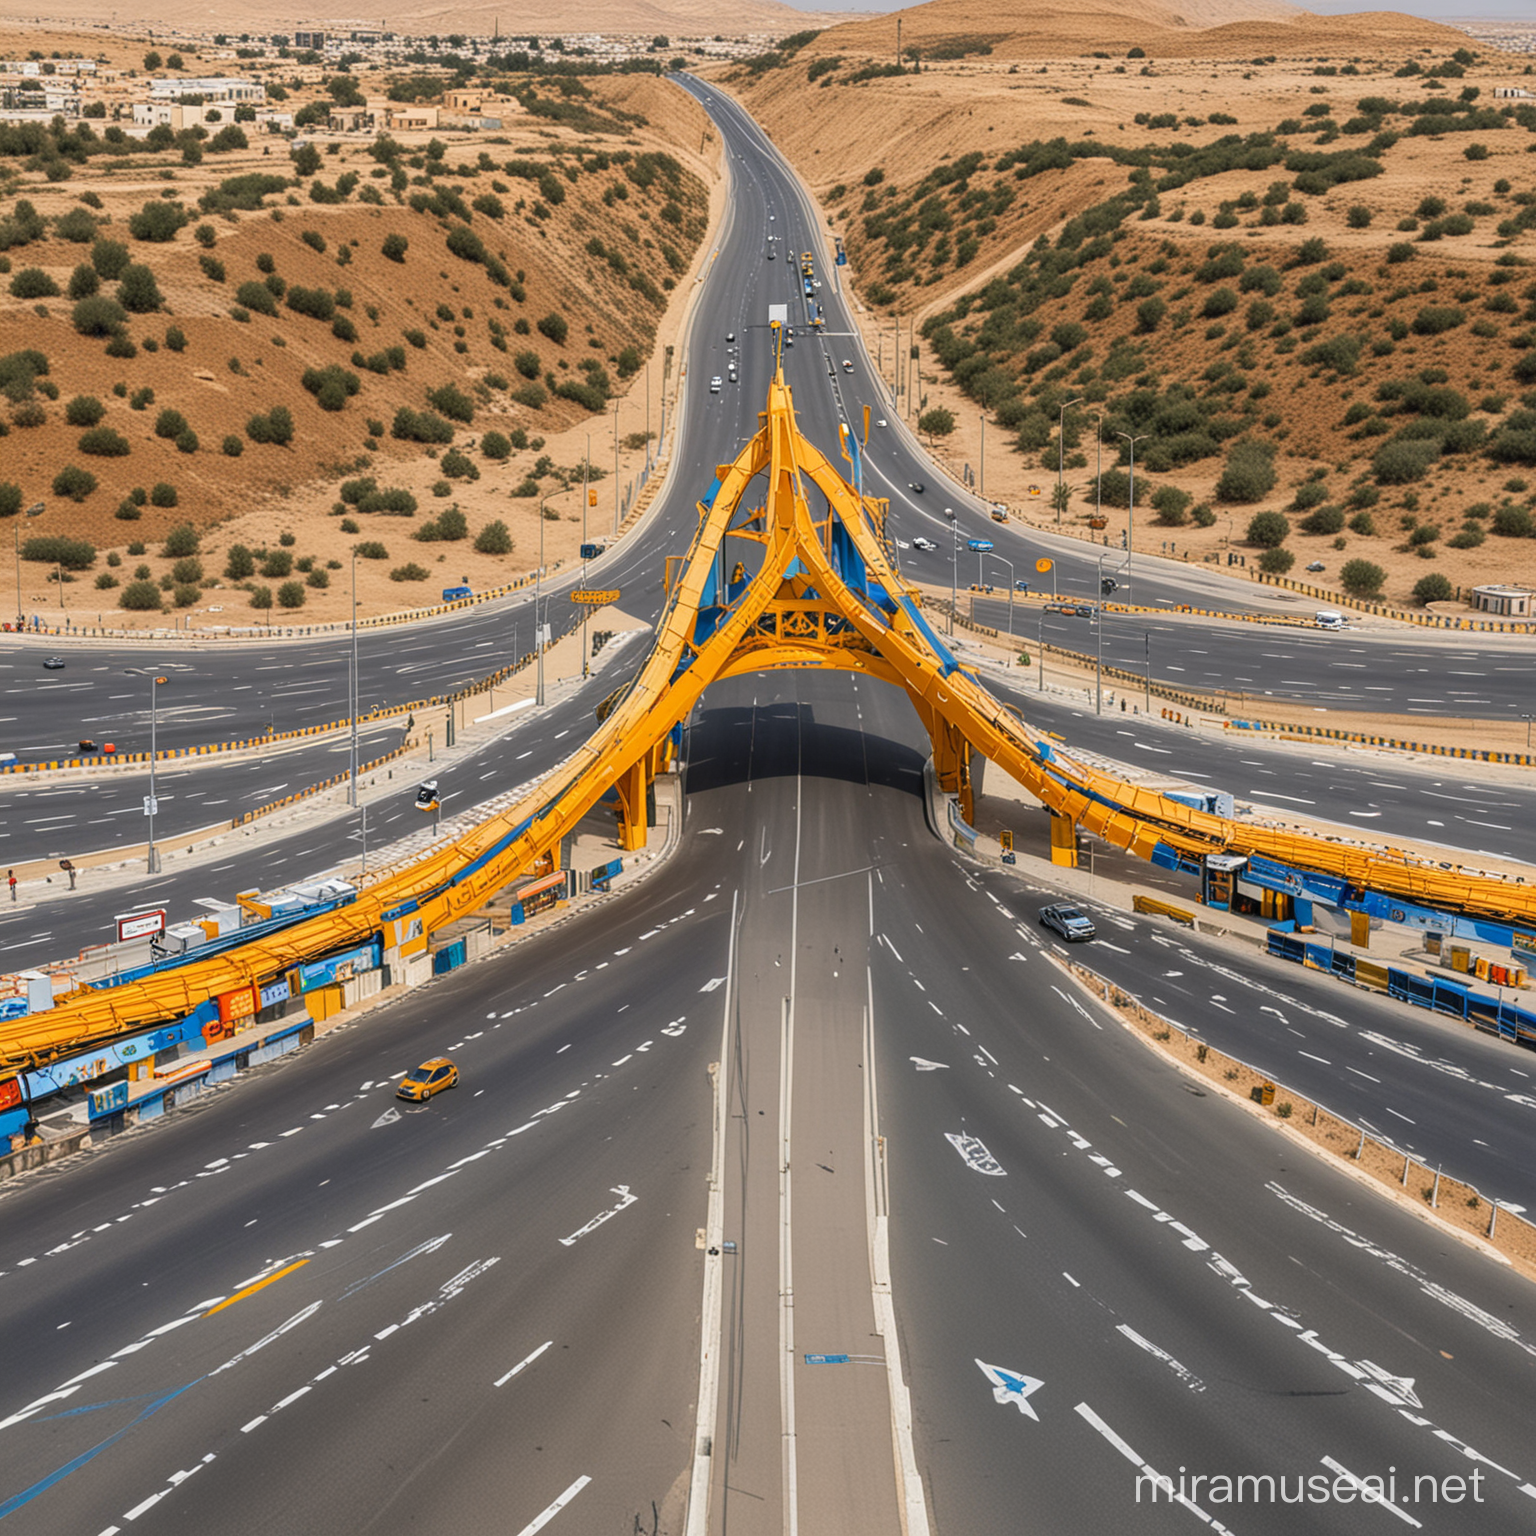 Design of toll gates for Qalyubia Governorate, shaped like a gear, yellow, blue and orange in colour
